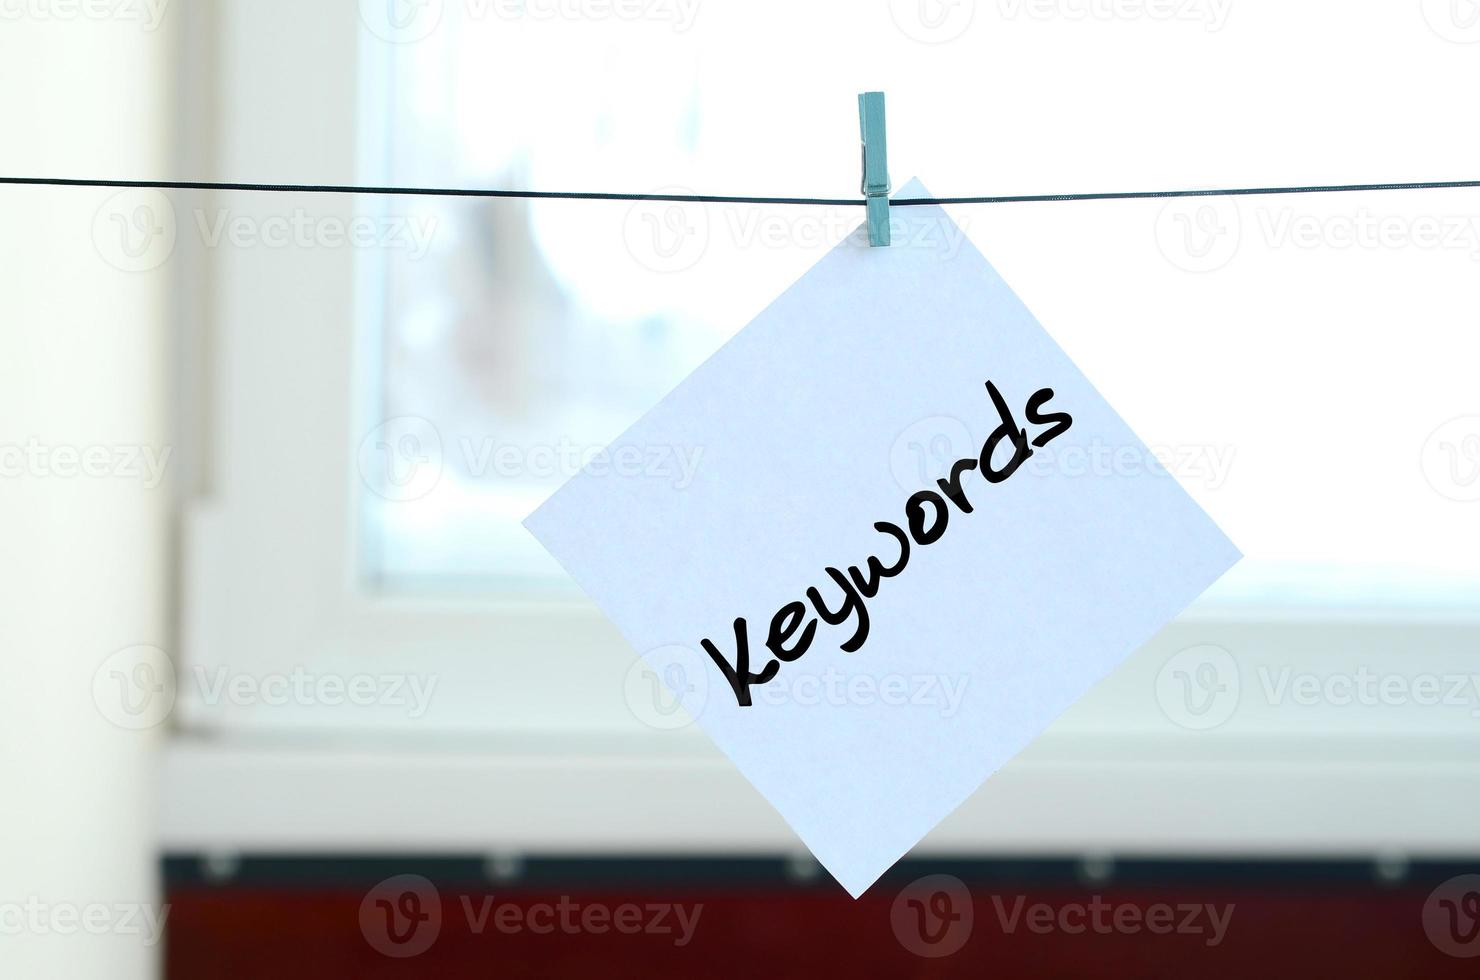 Keywords. Note is written on a white sticker that hangs with a clothespin on a rope on a background of window glass photo